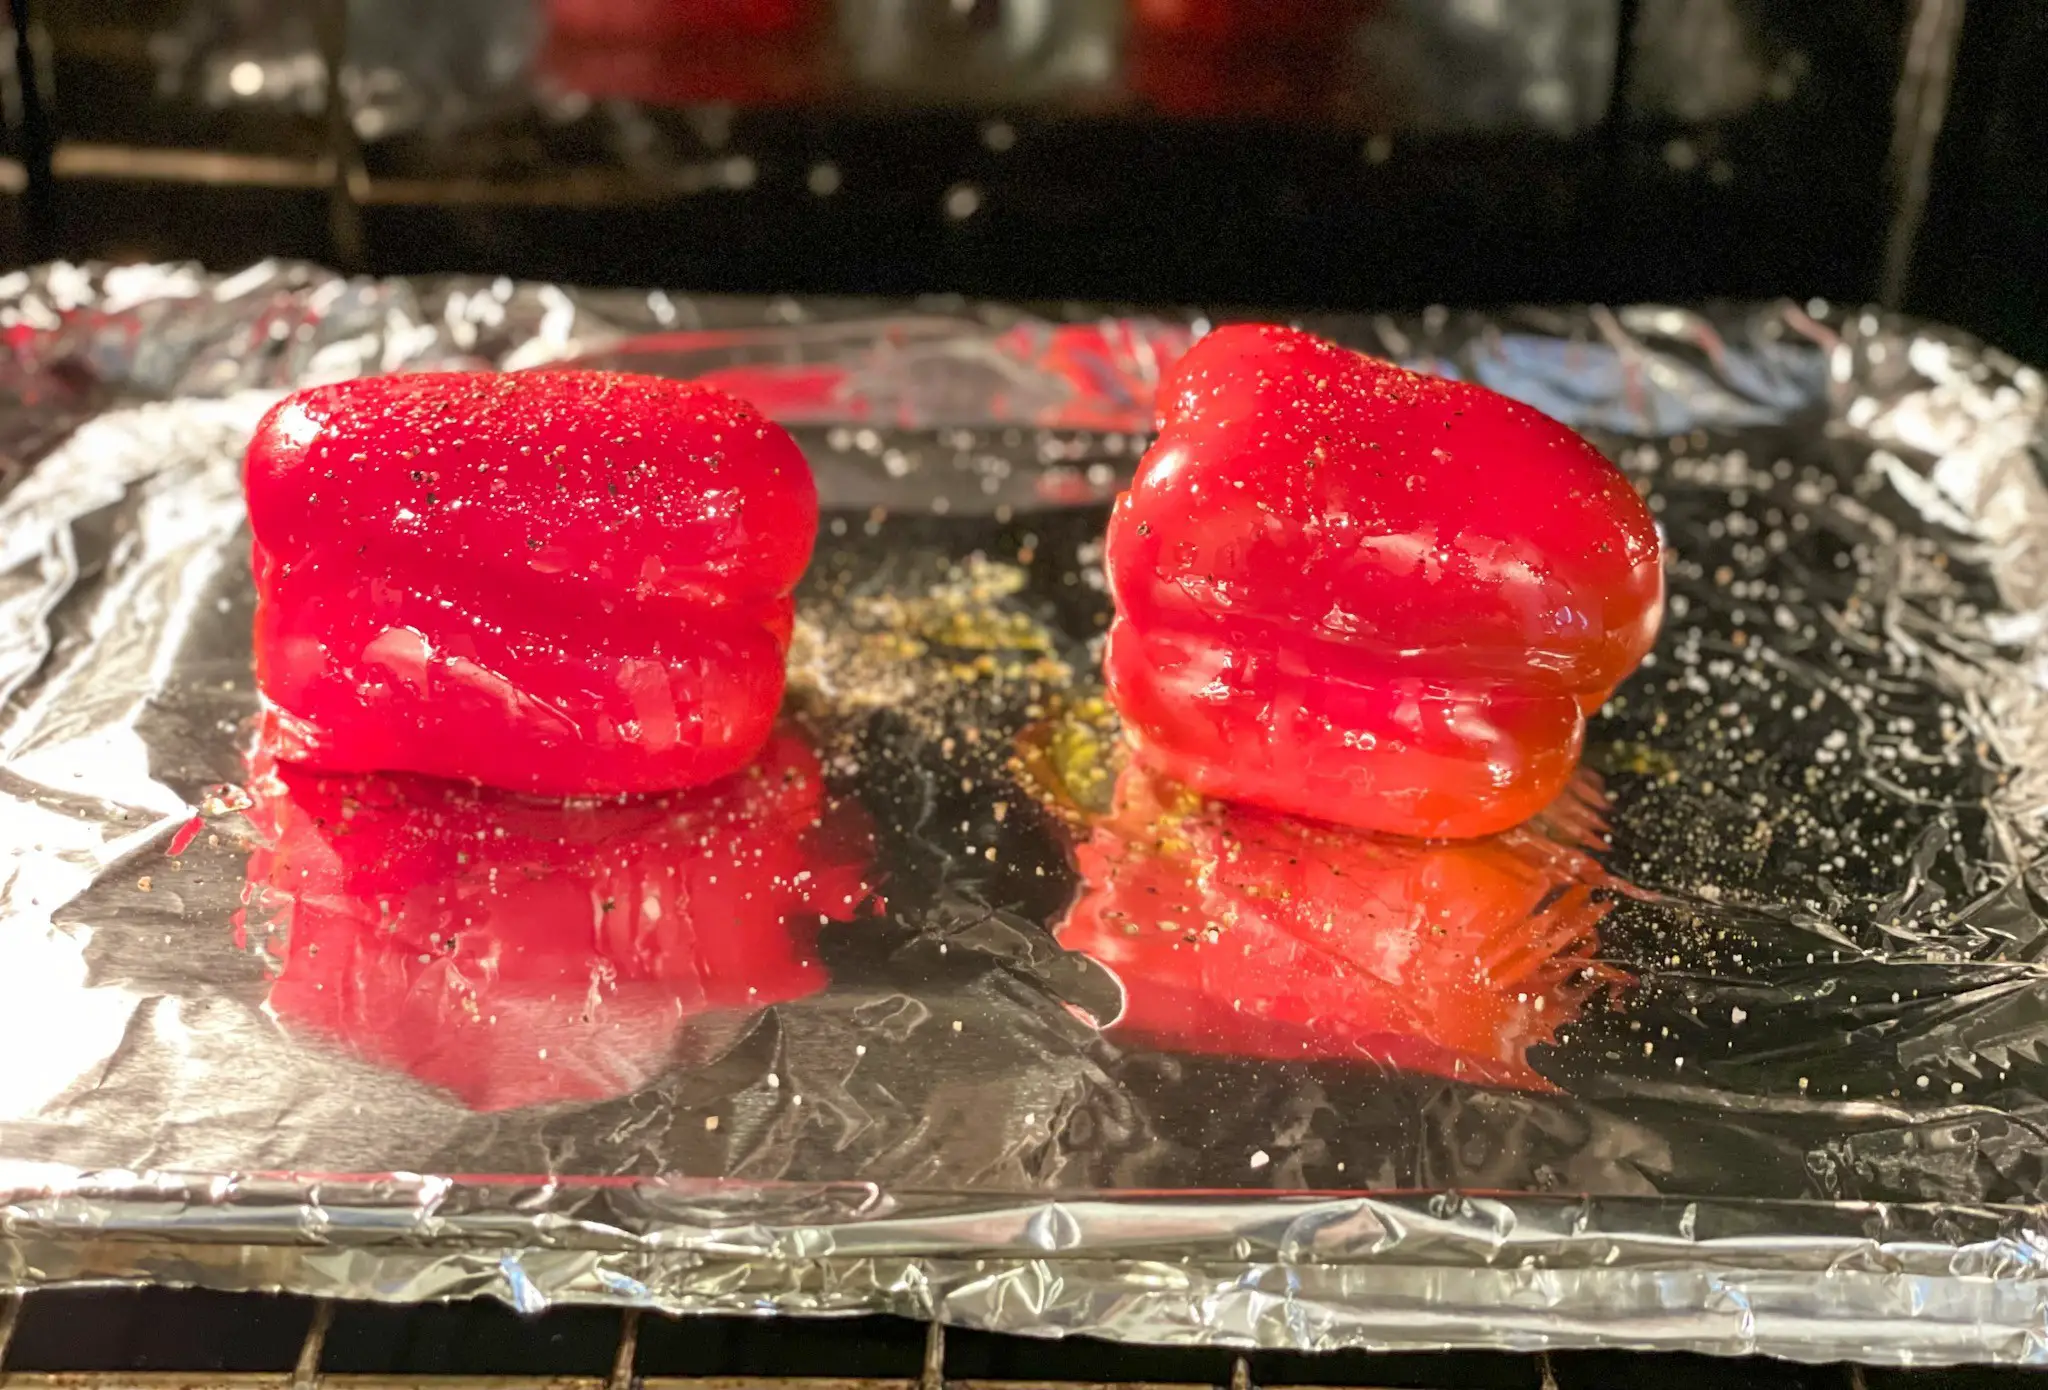 Red peppers before roasting.